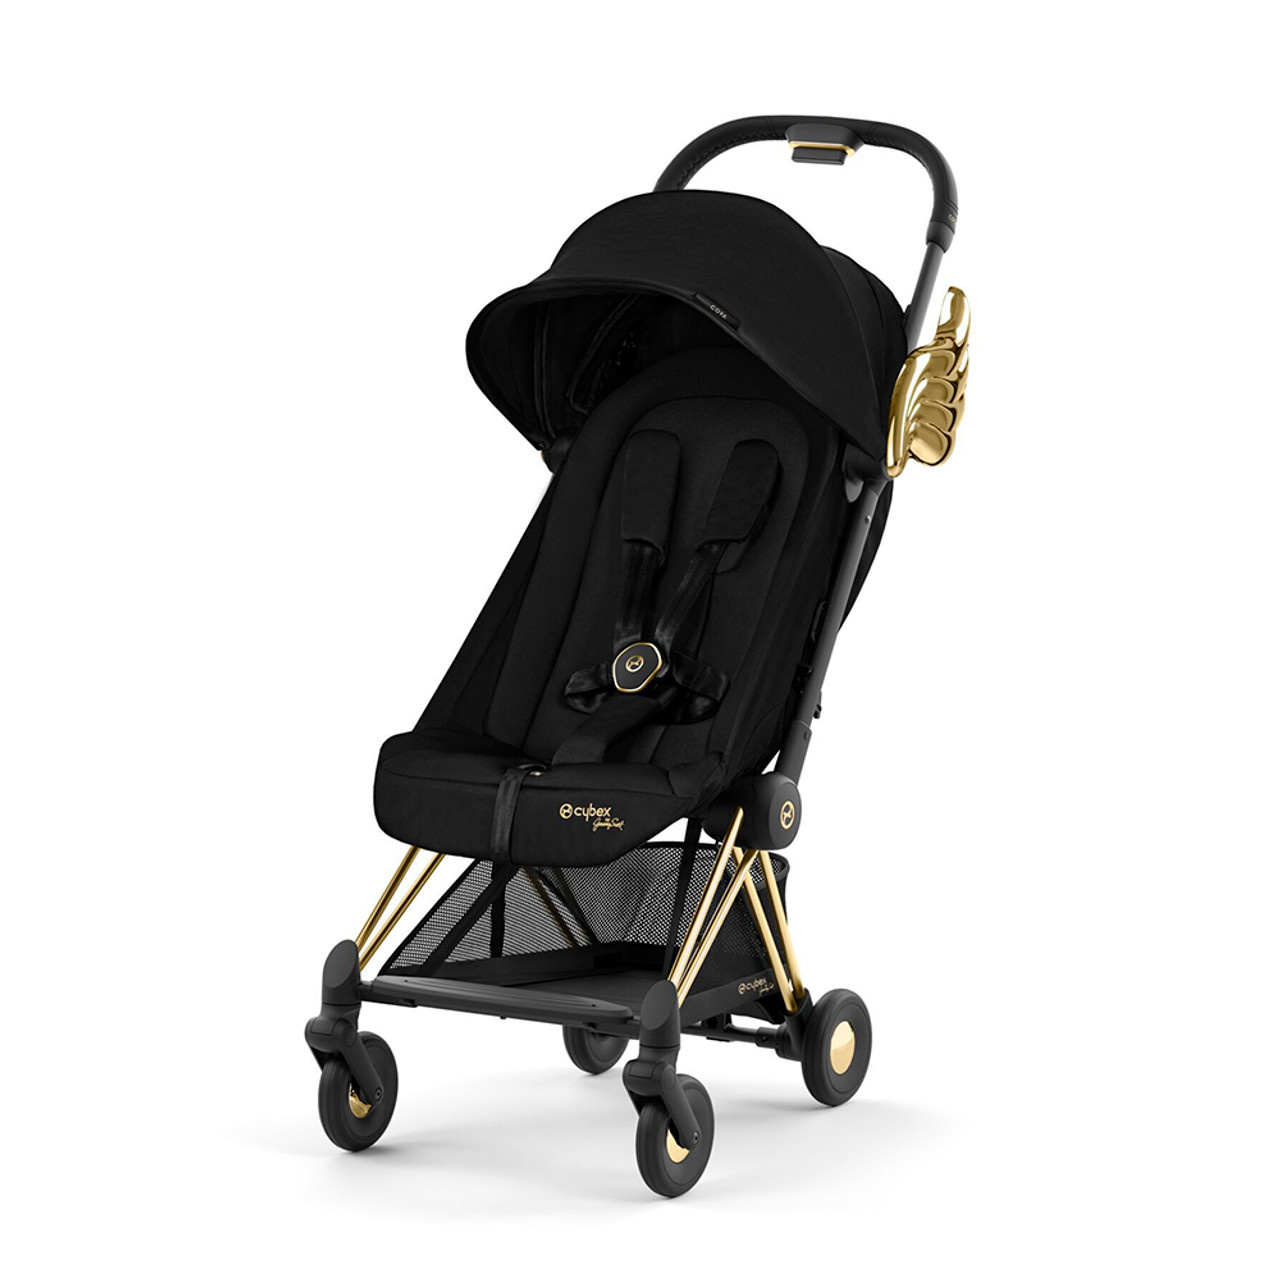 CYBEX Beezy 2 Compact and Lightweight Travel Stroller - Compatible